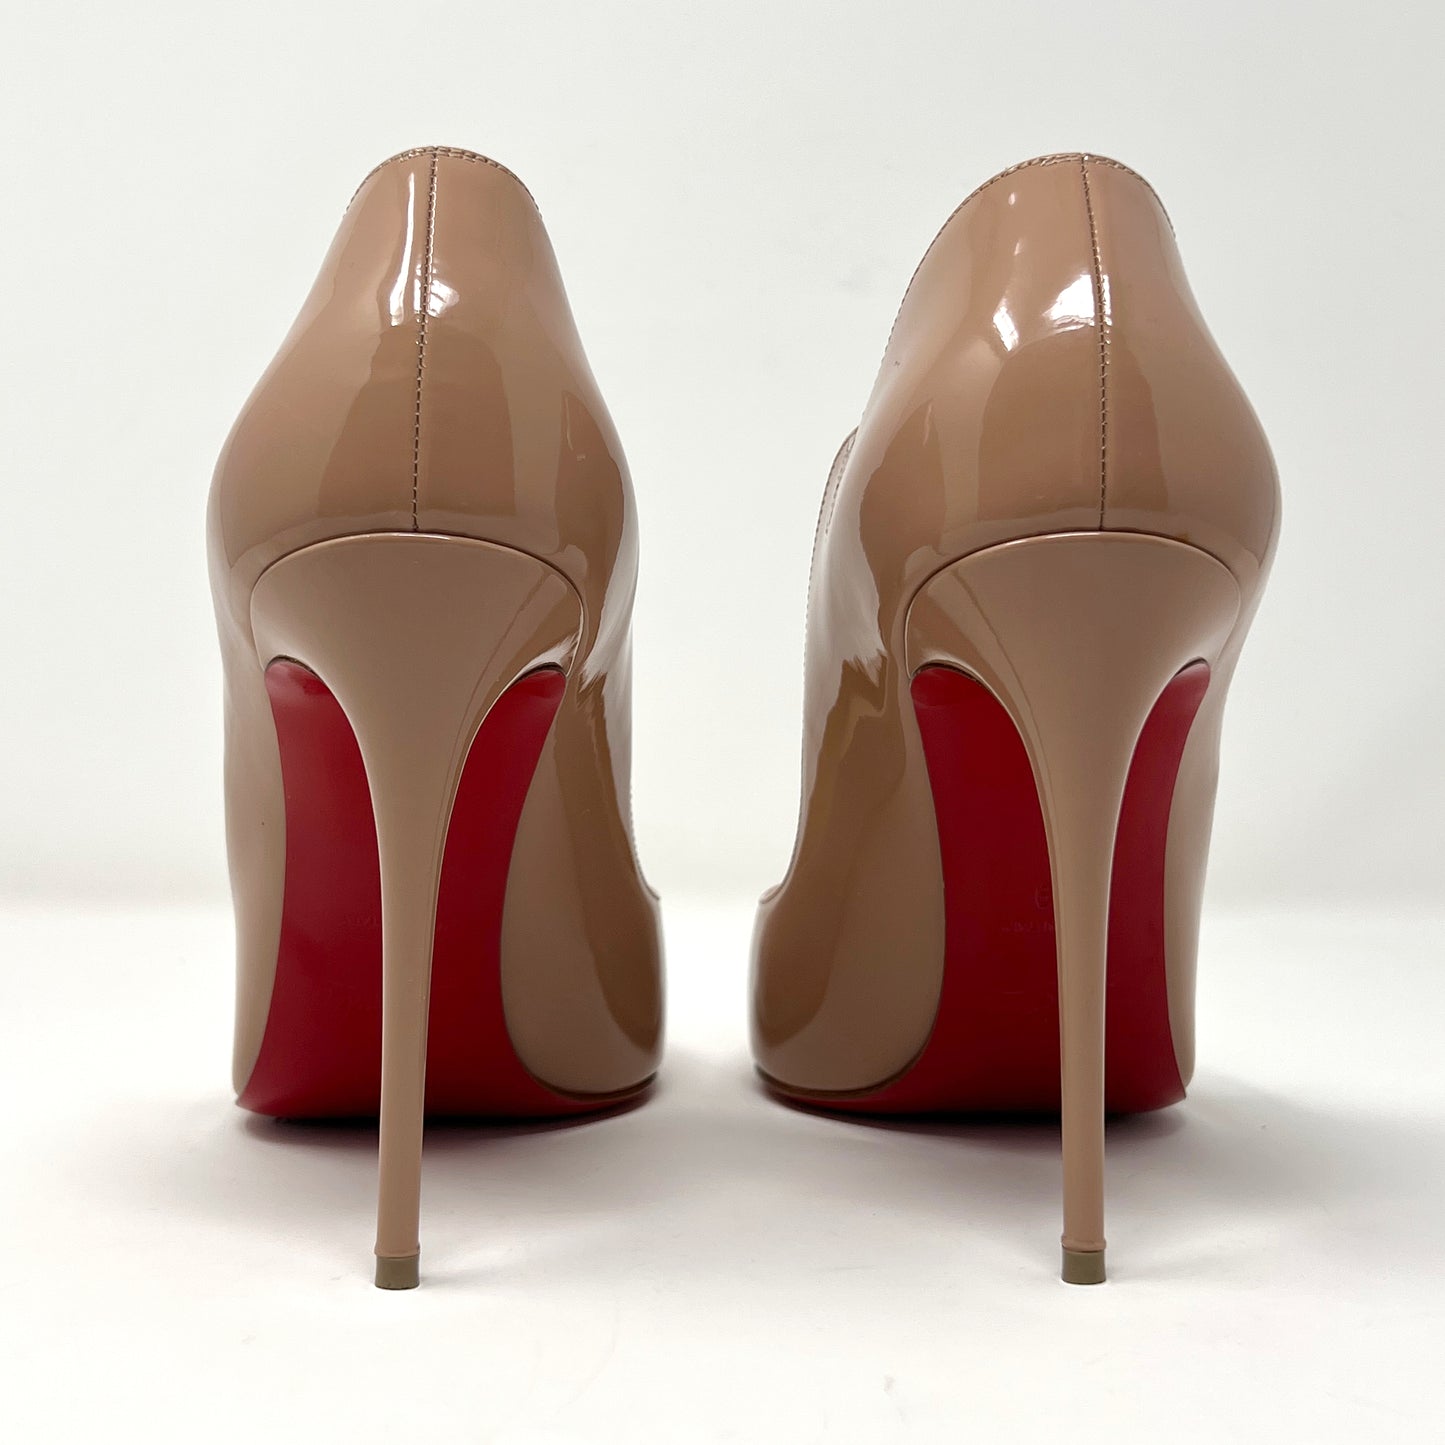 Christian Louboutin Hot Chick 100 Pointed Patent Leather Nude Tan Heels Pumps Size EU 39